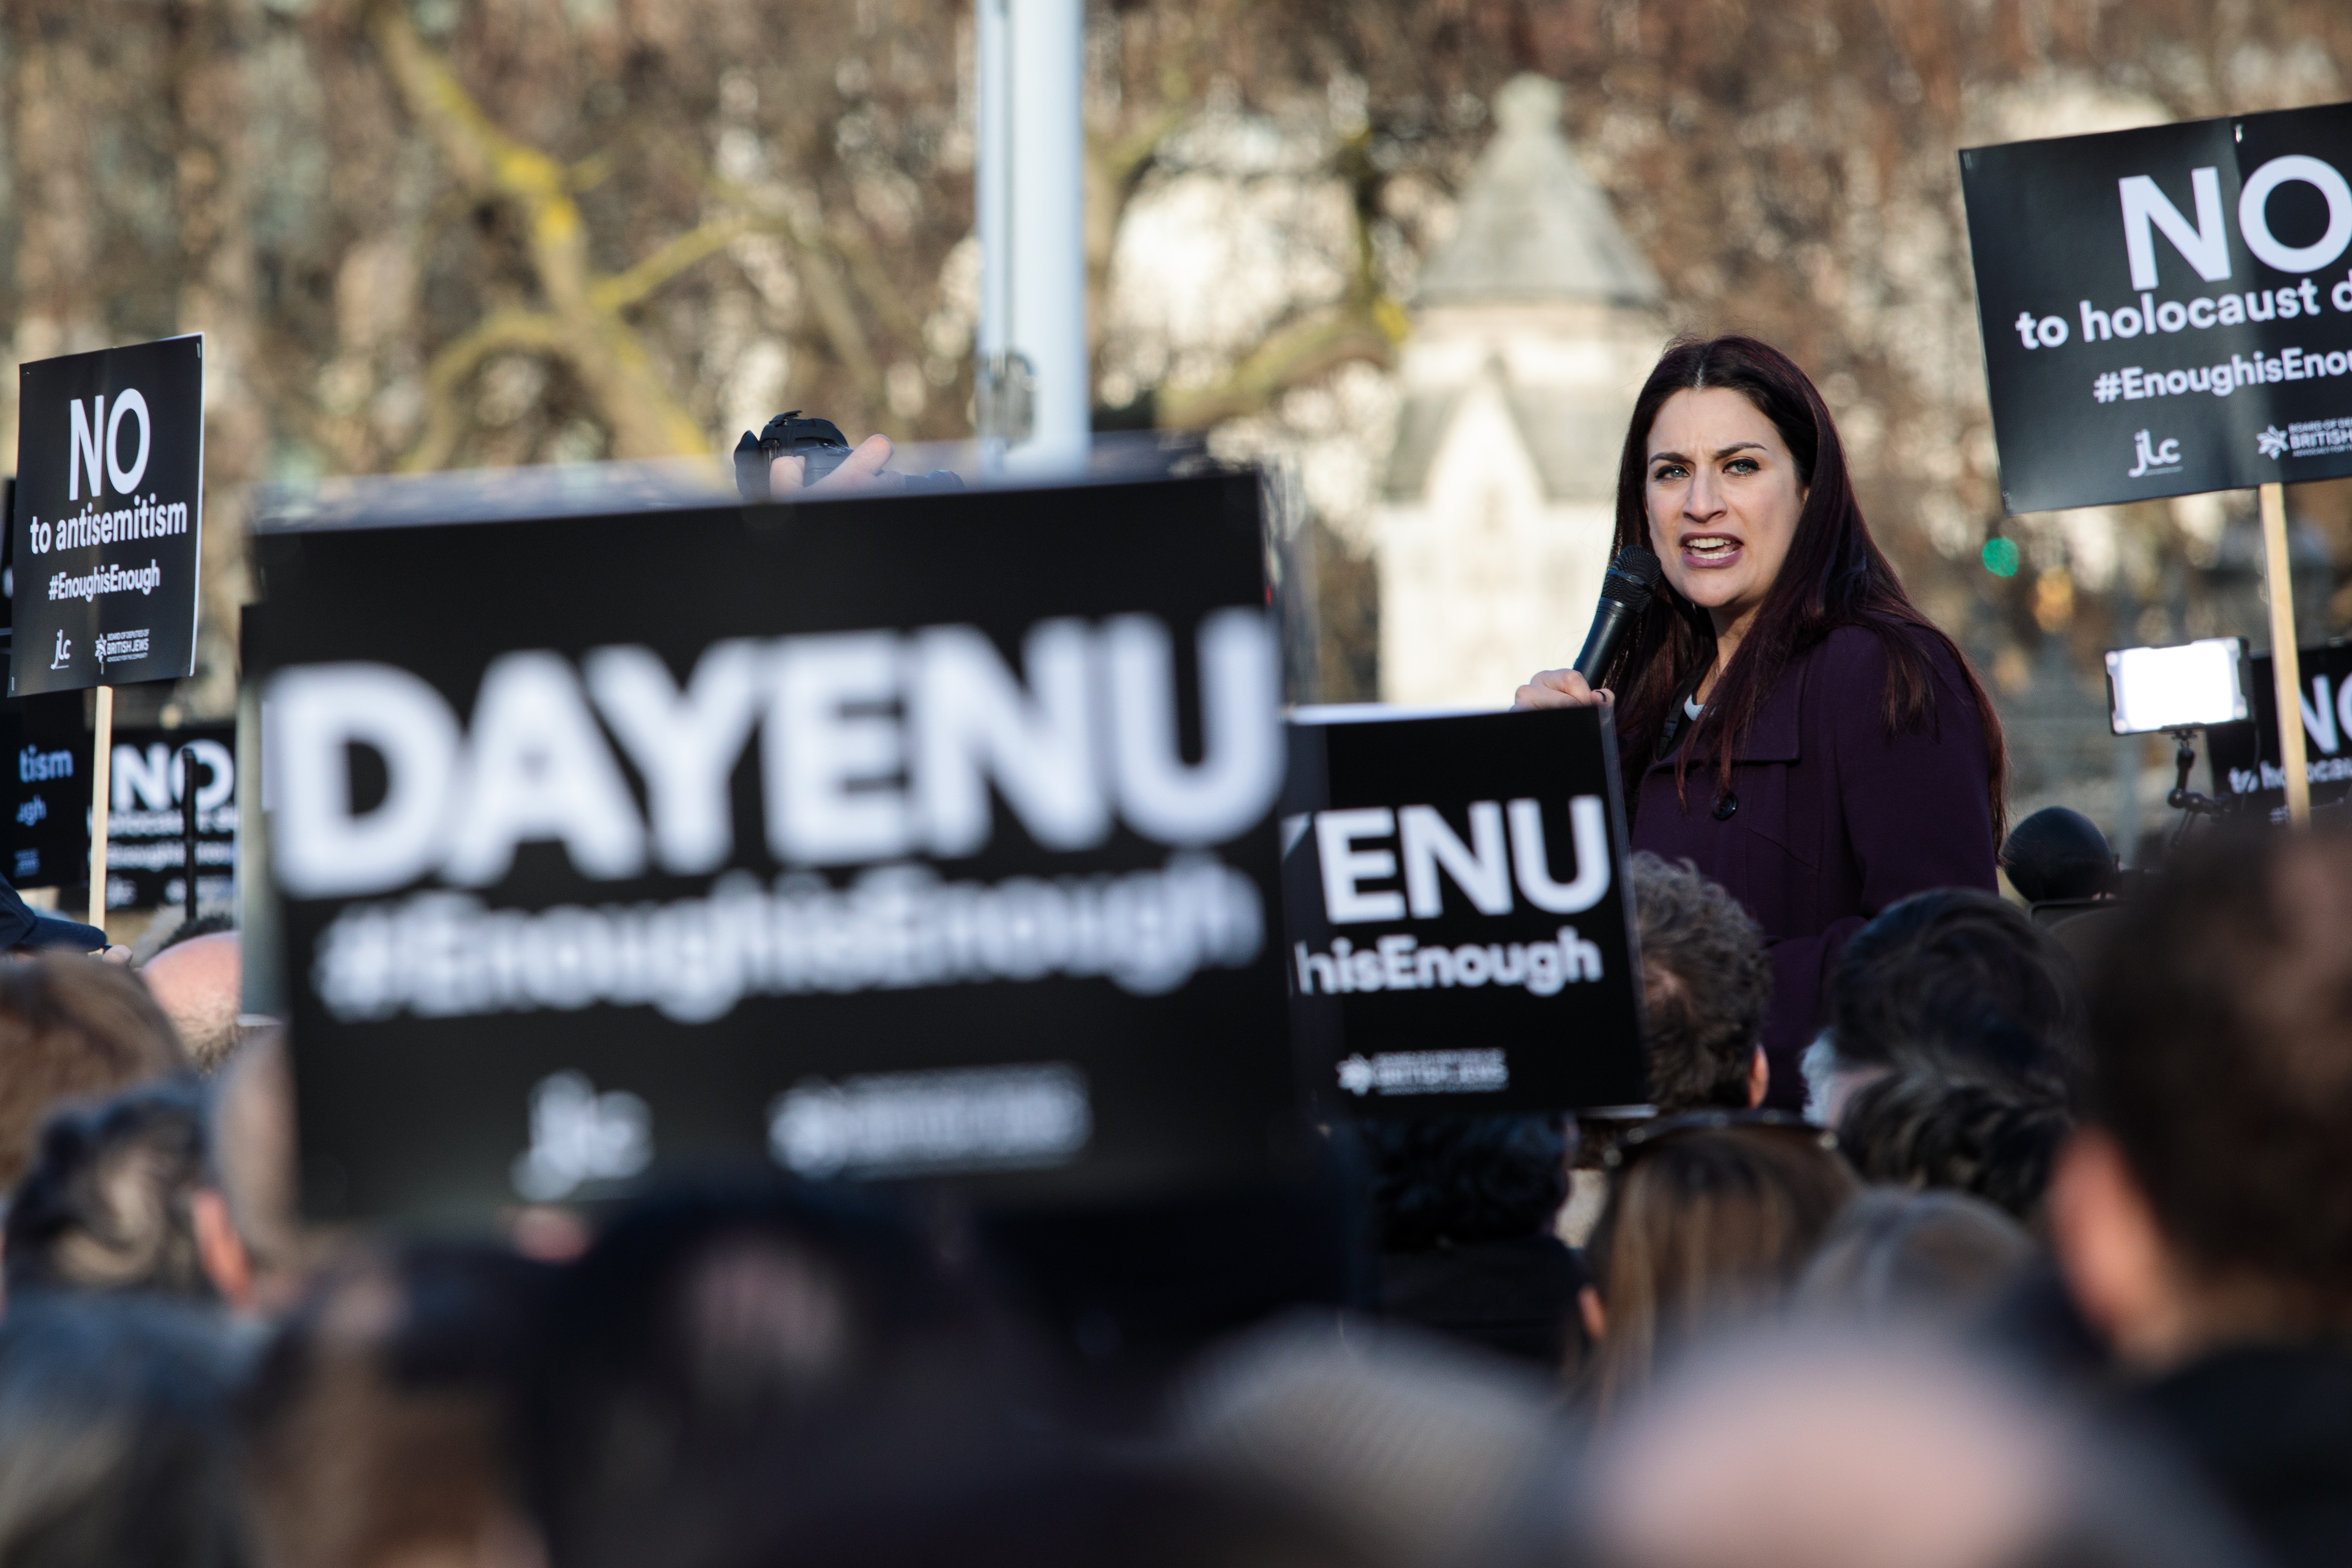 LONDON, ENGLAND - MARCH 26: British Labour Co-operative politician Luciana Berger addresses the crowd during a demonstration in Parliament Square against anti-Semitism in the Labour Party on March 26, 2018 in London, England. The Board of Deputies of British Jews and the Jewish Leadership Council have drawn up a letter accusing Labour Leader Jeremy Corbyn of failing to address anti-Semitism in his party. Mr Corbyn has today apologised to Jewish groups for "pockets of anti-Semitism" in Labour. (Photo by Jack Taylor/Getty Images)